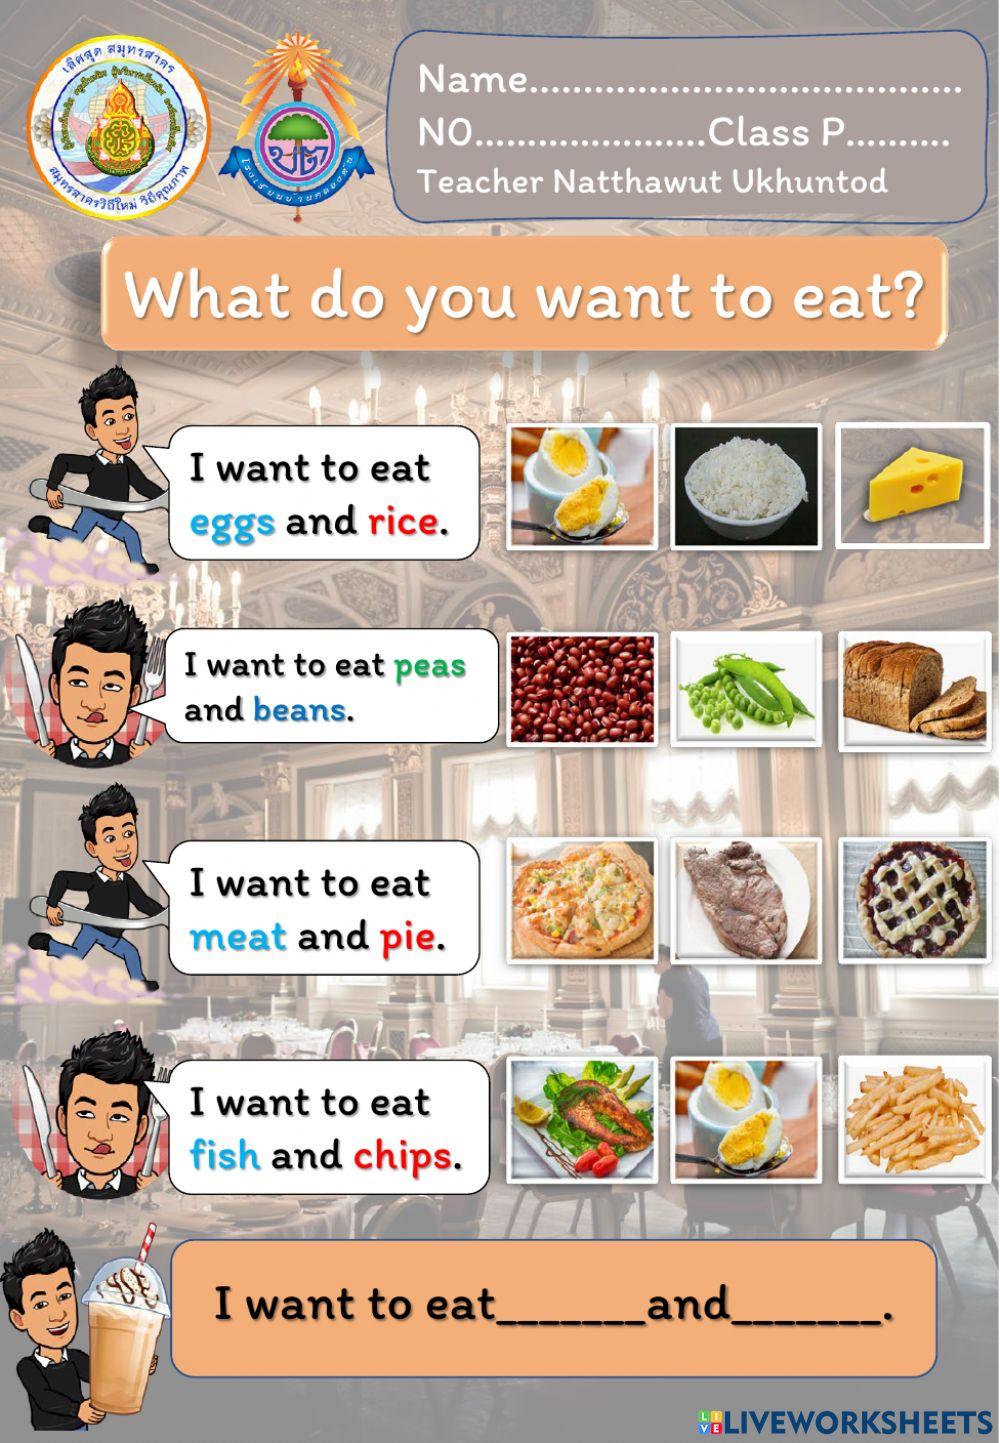 What do you want to eat?